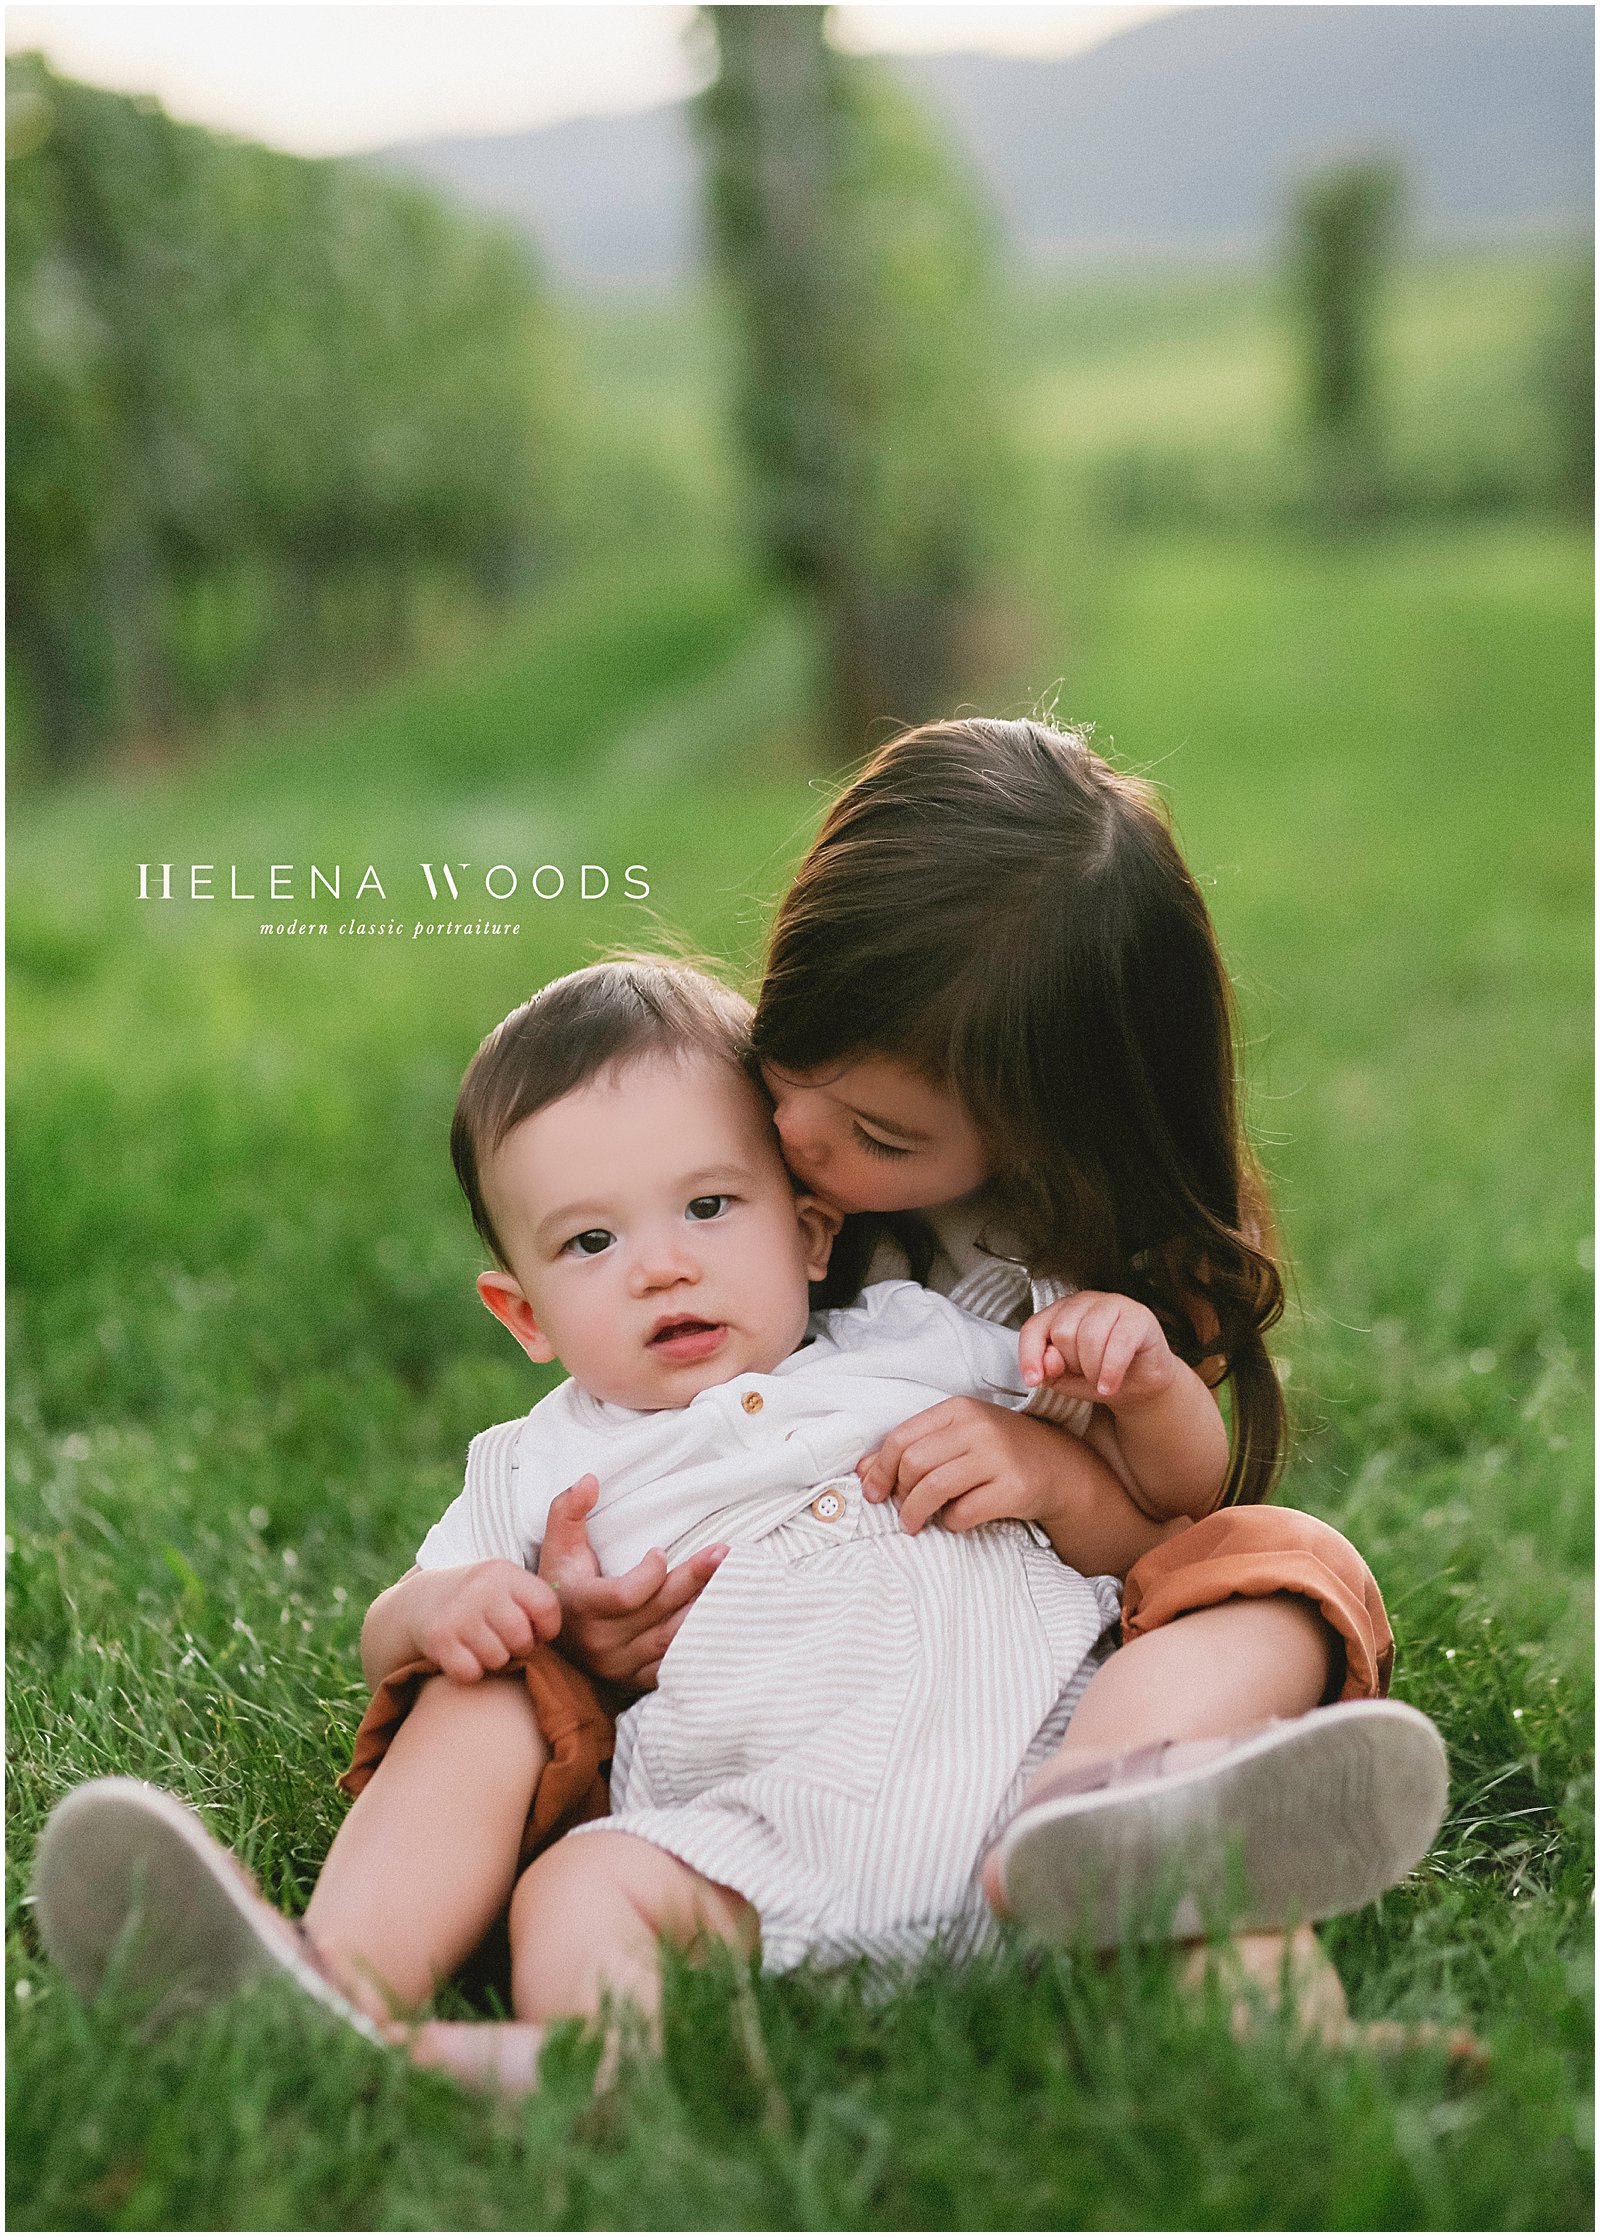 kids smiling with siblings photographed by Helena Woods family photographer